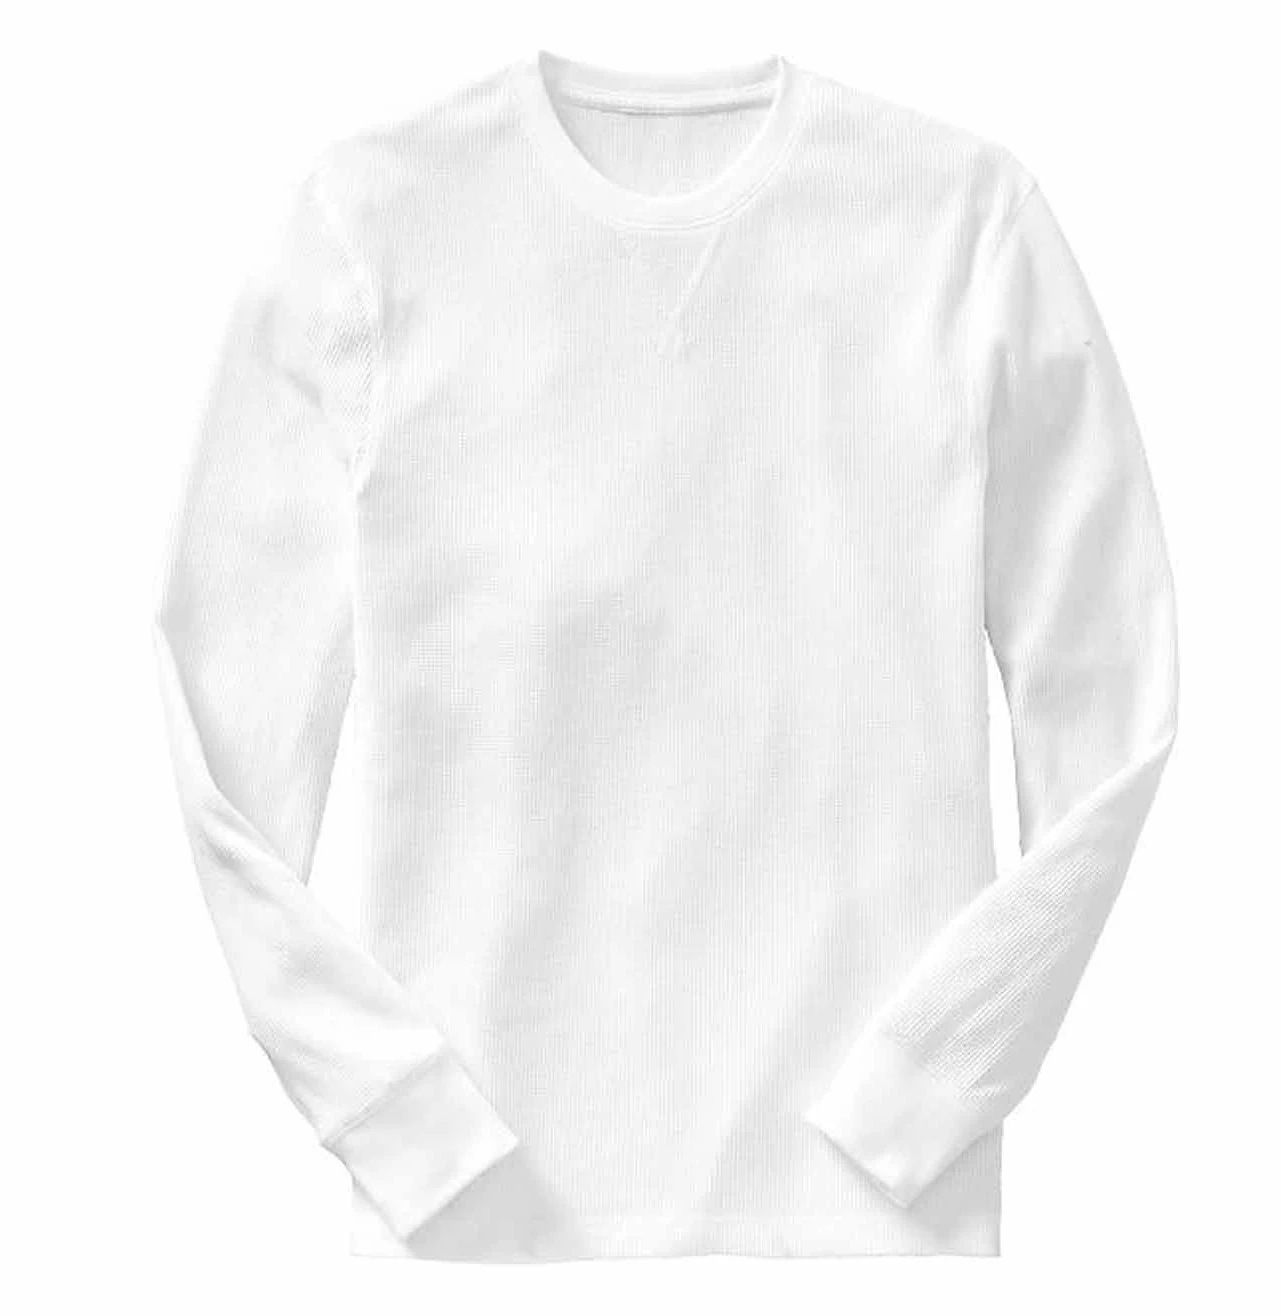 Oem Blank White Cotton Crewneck Long Sleeve Fitted Men's Winter ...